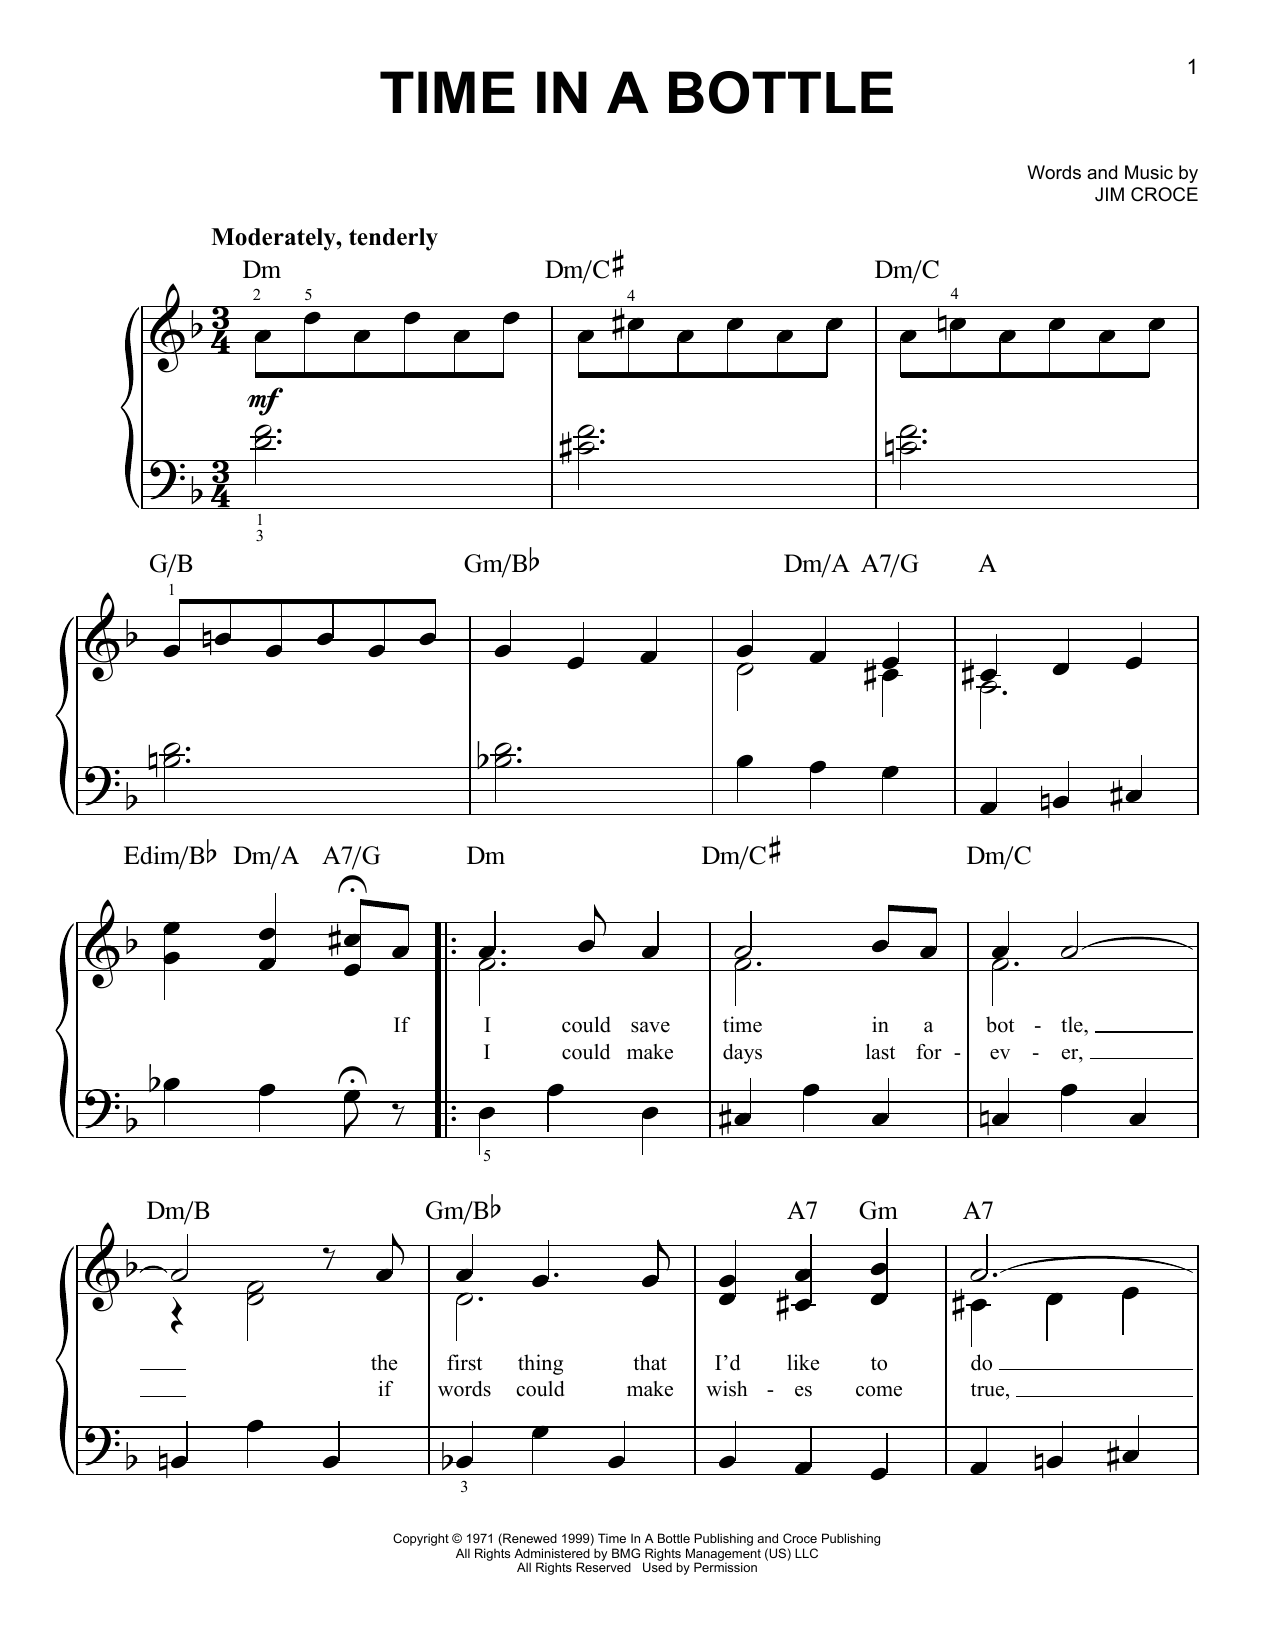 Jim Croce Time In A Bottle sheet music notes and chords. Download Printable PDF.